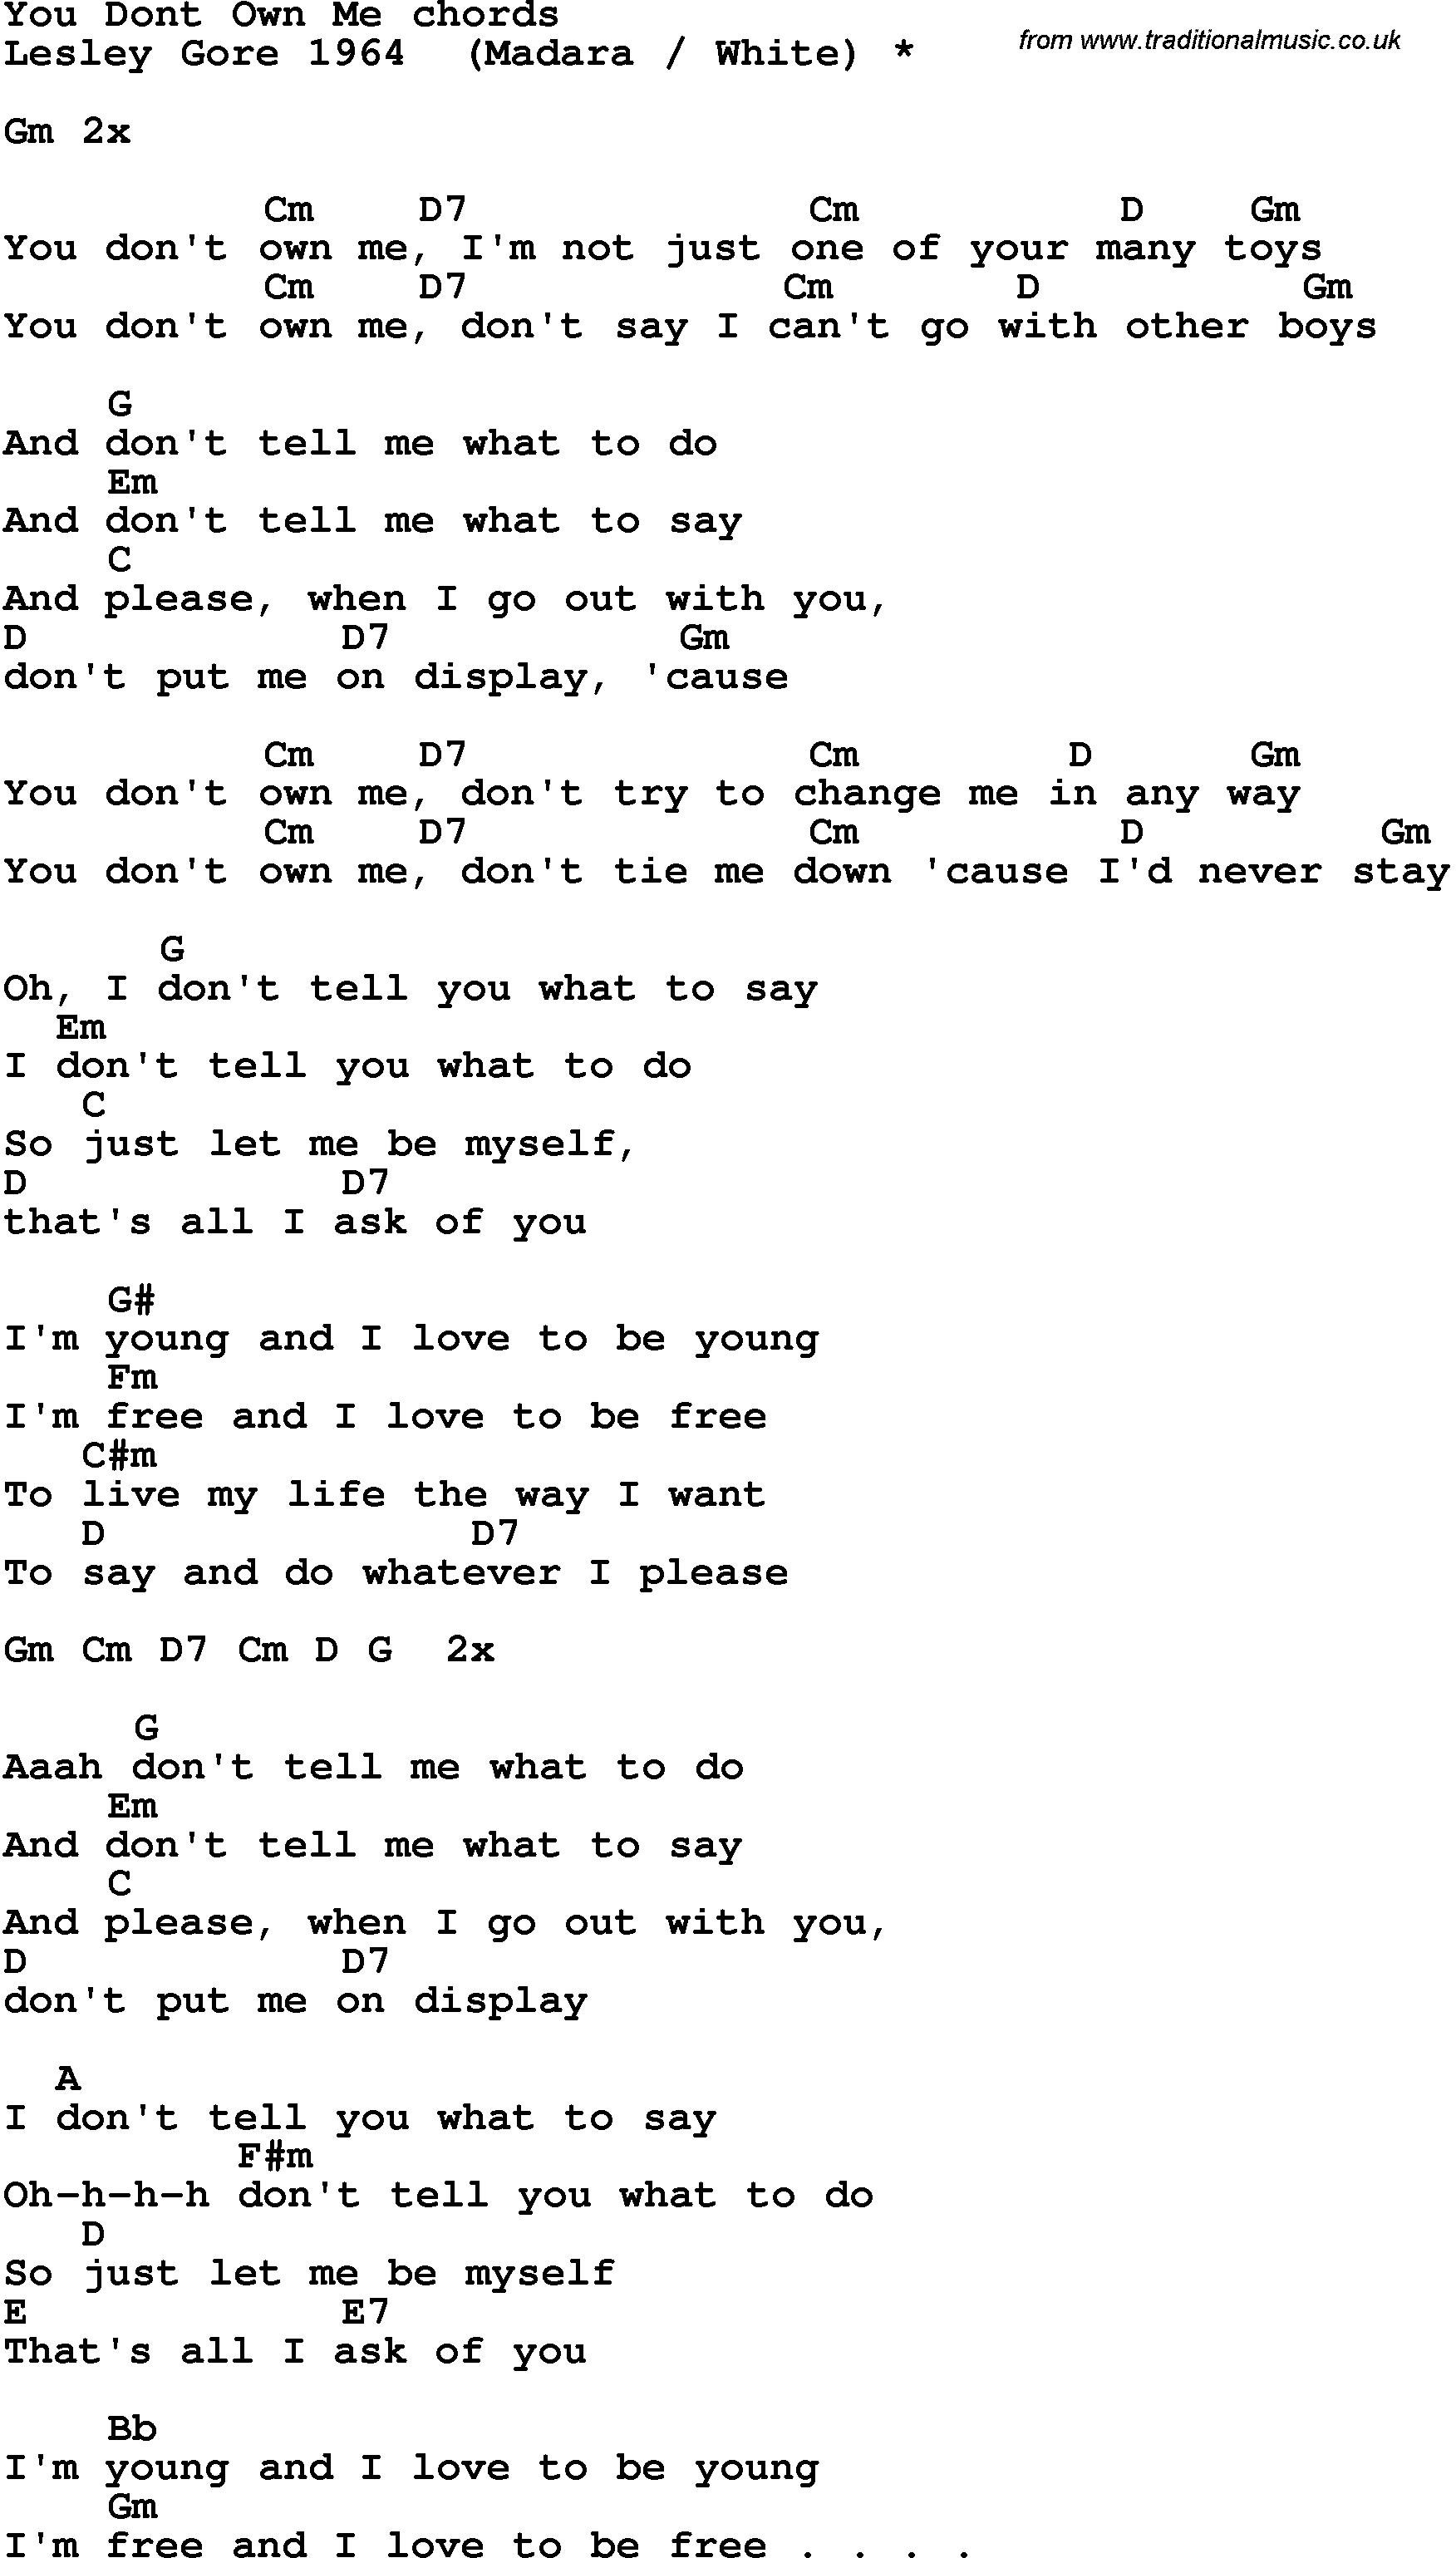 Stay With Me Chords Song Lyrics With Guitar Chords For You Dont Own Me